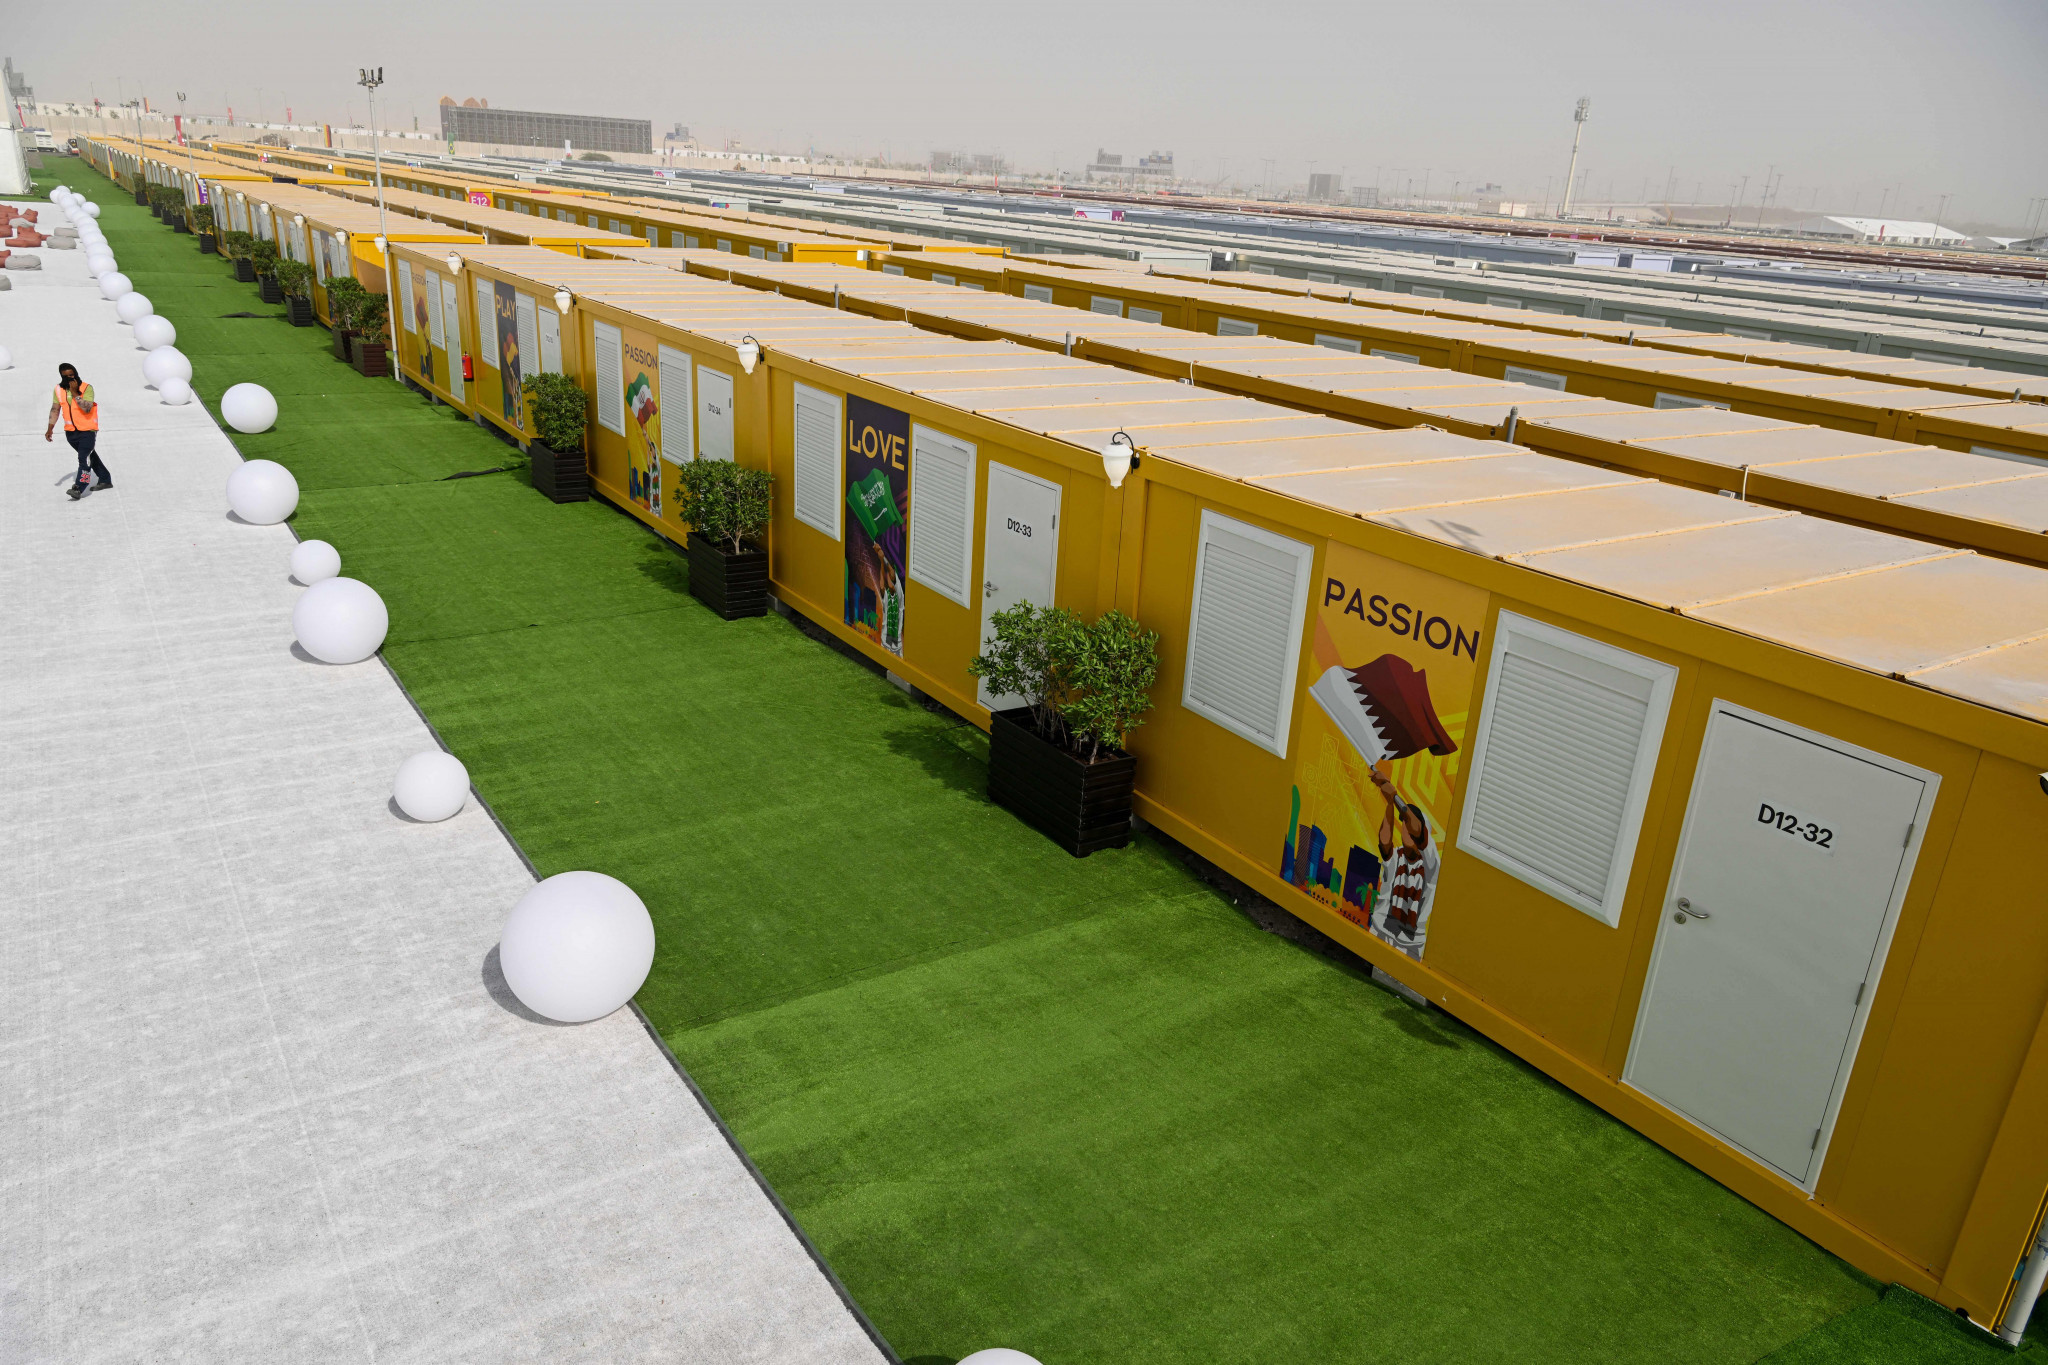 Qatar unveils industrial cabins for more fan accommodation for FIFA World Cup